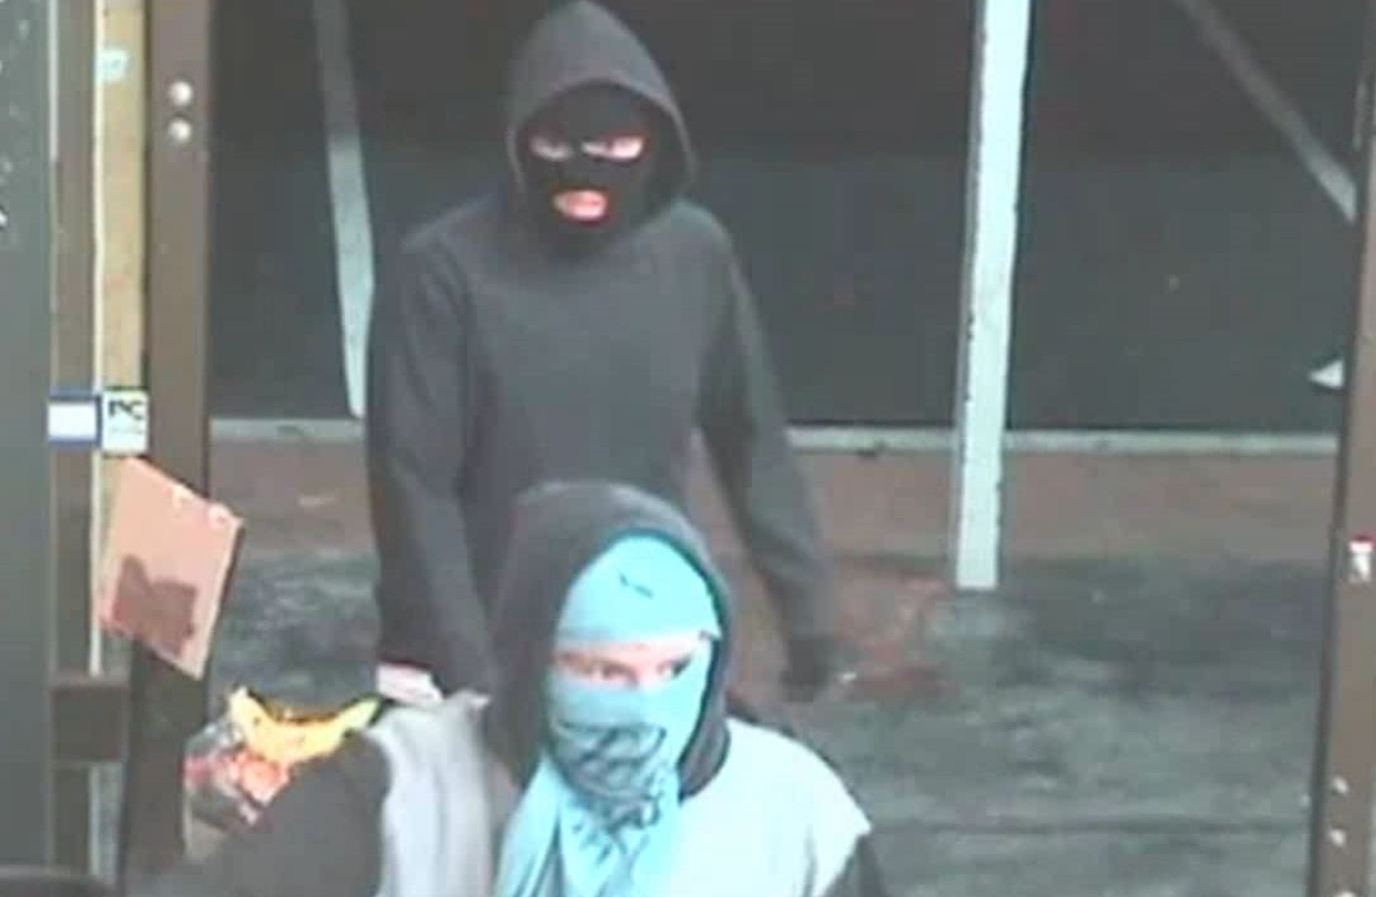 Two male offenders described as Caucasian, around 6’ tall (183cm), wearing black hooded jumpers with their faces covered, one using a balaclava and the other a T-shirt.